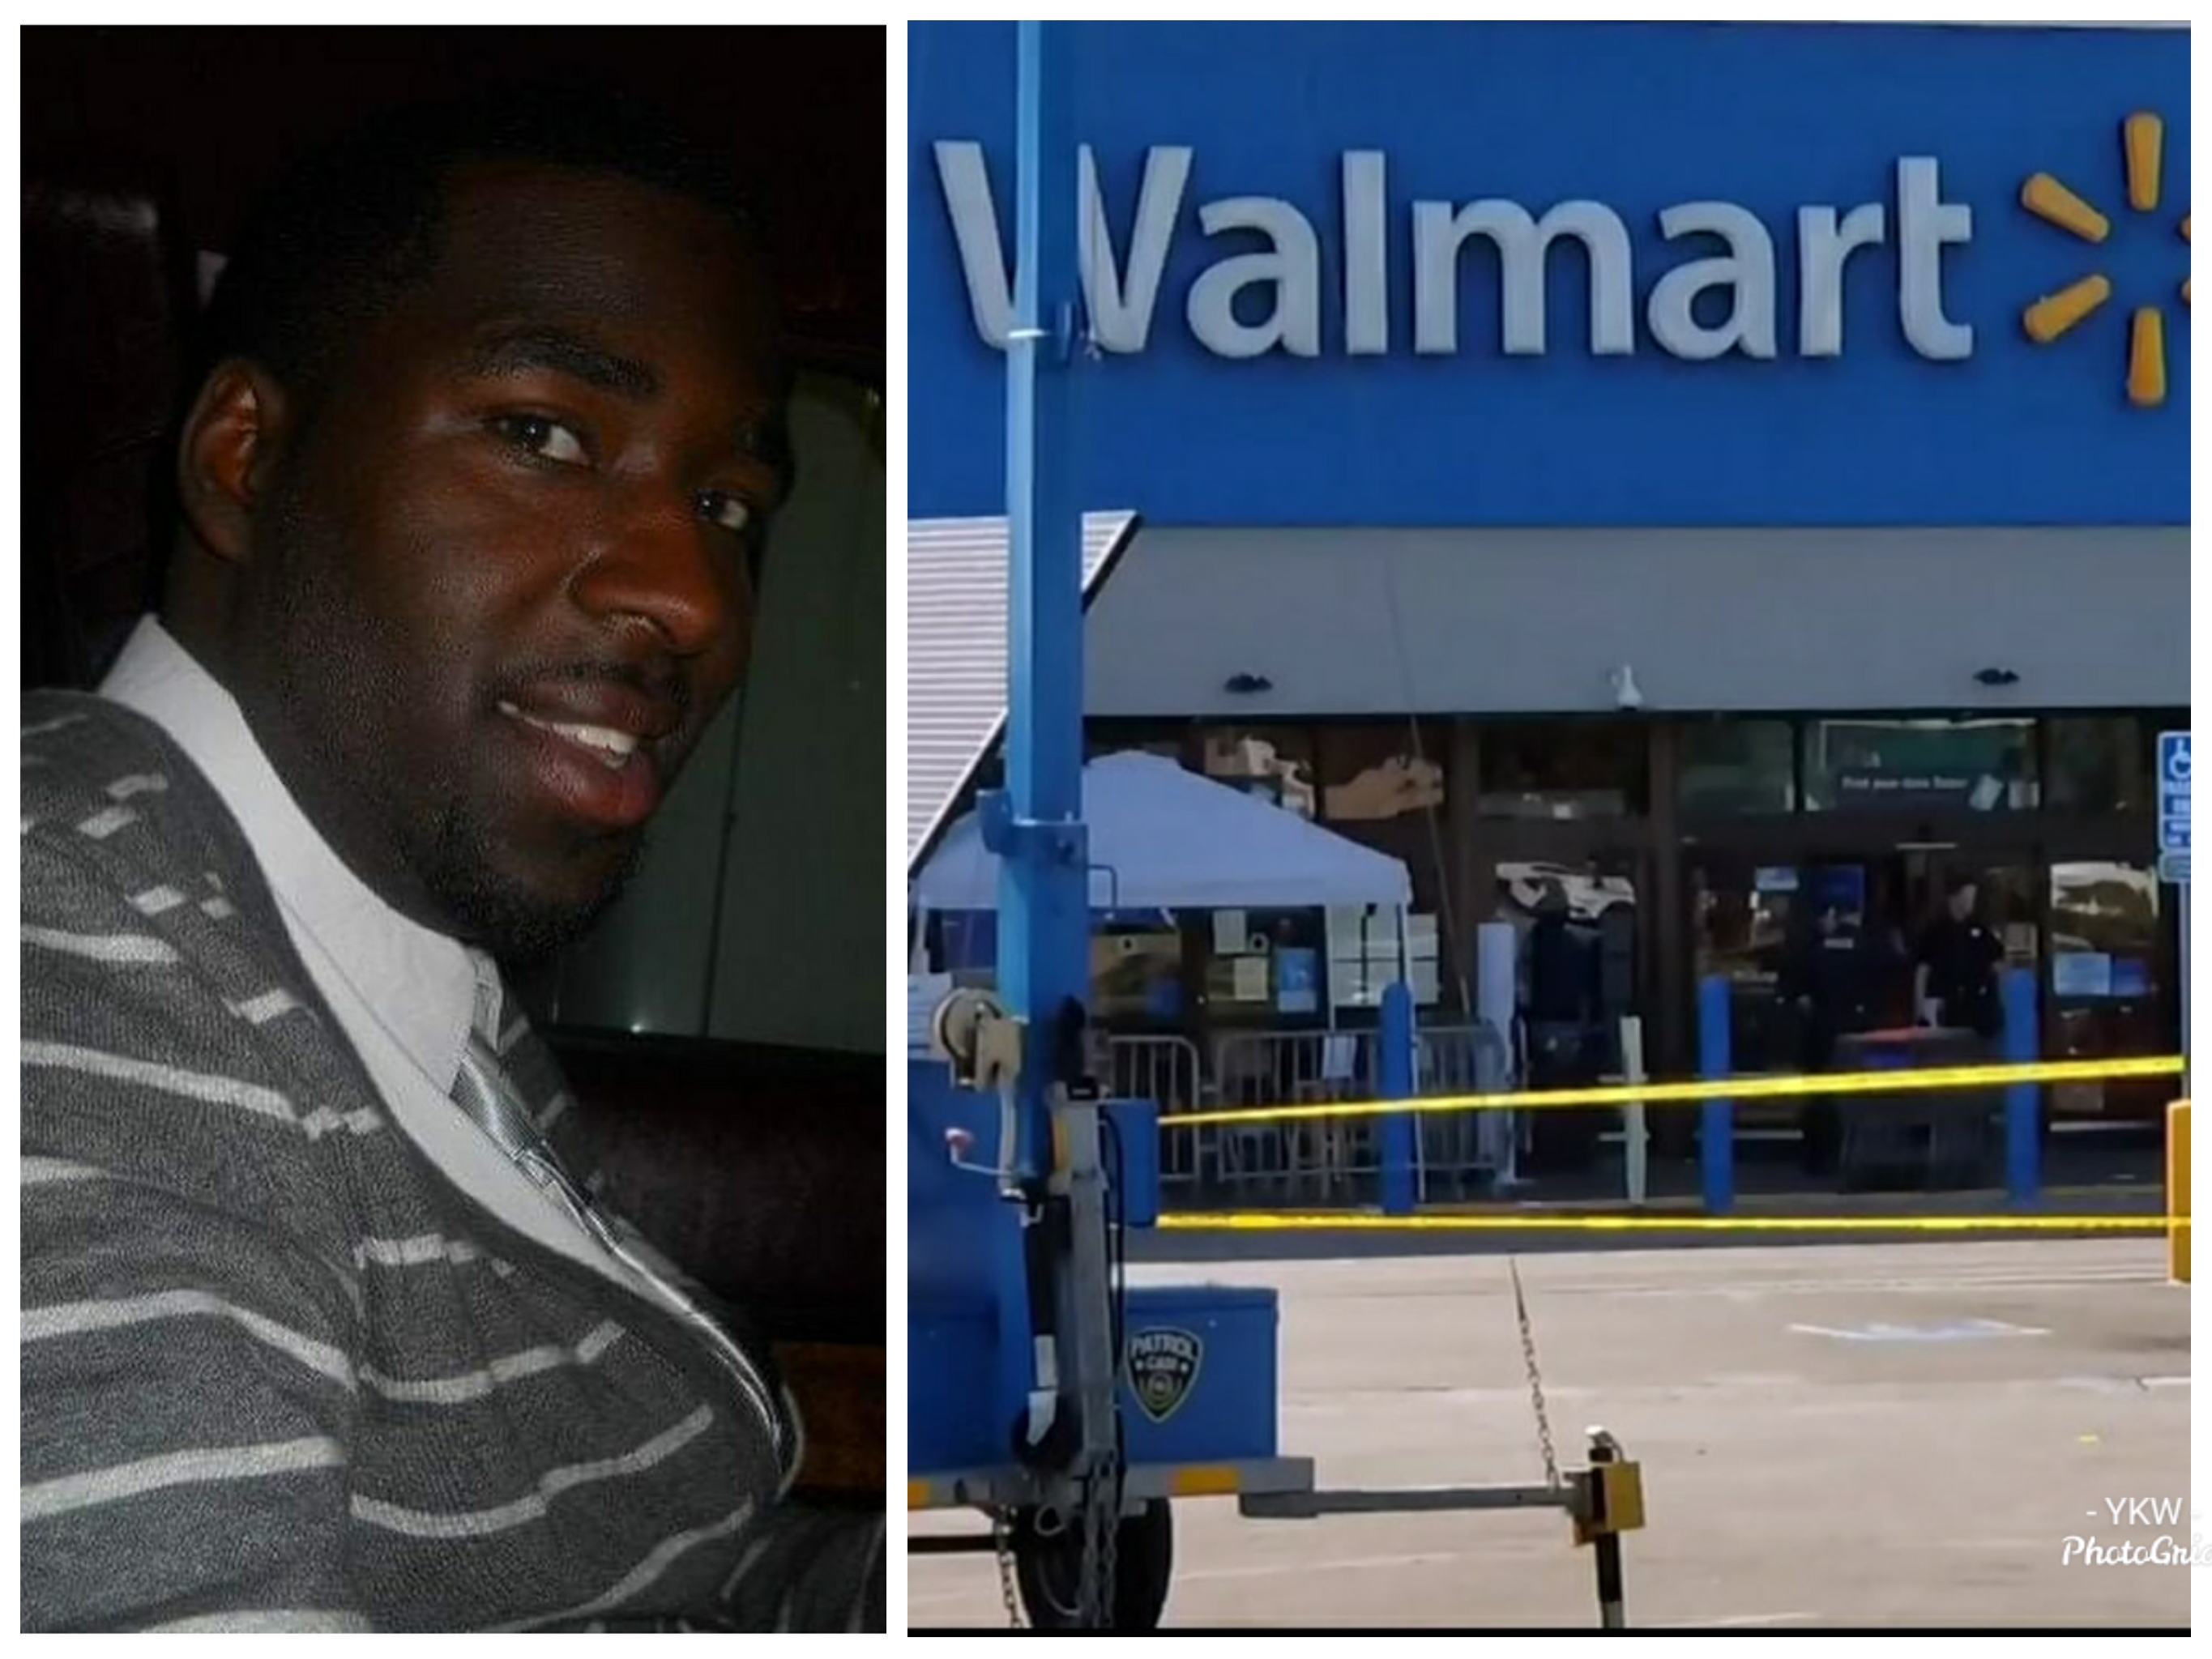 Man With Baseball Bat Who Was Fatally Shot By Police In Walmart Reportedly Diagnosed With Depression And Schizophrenia